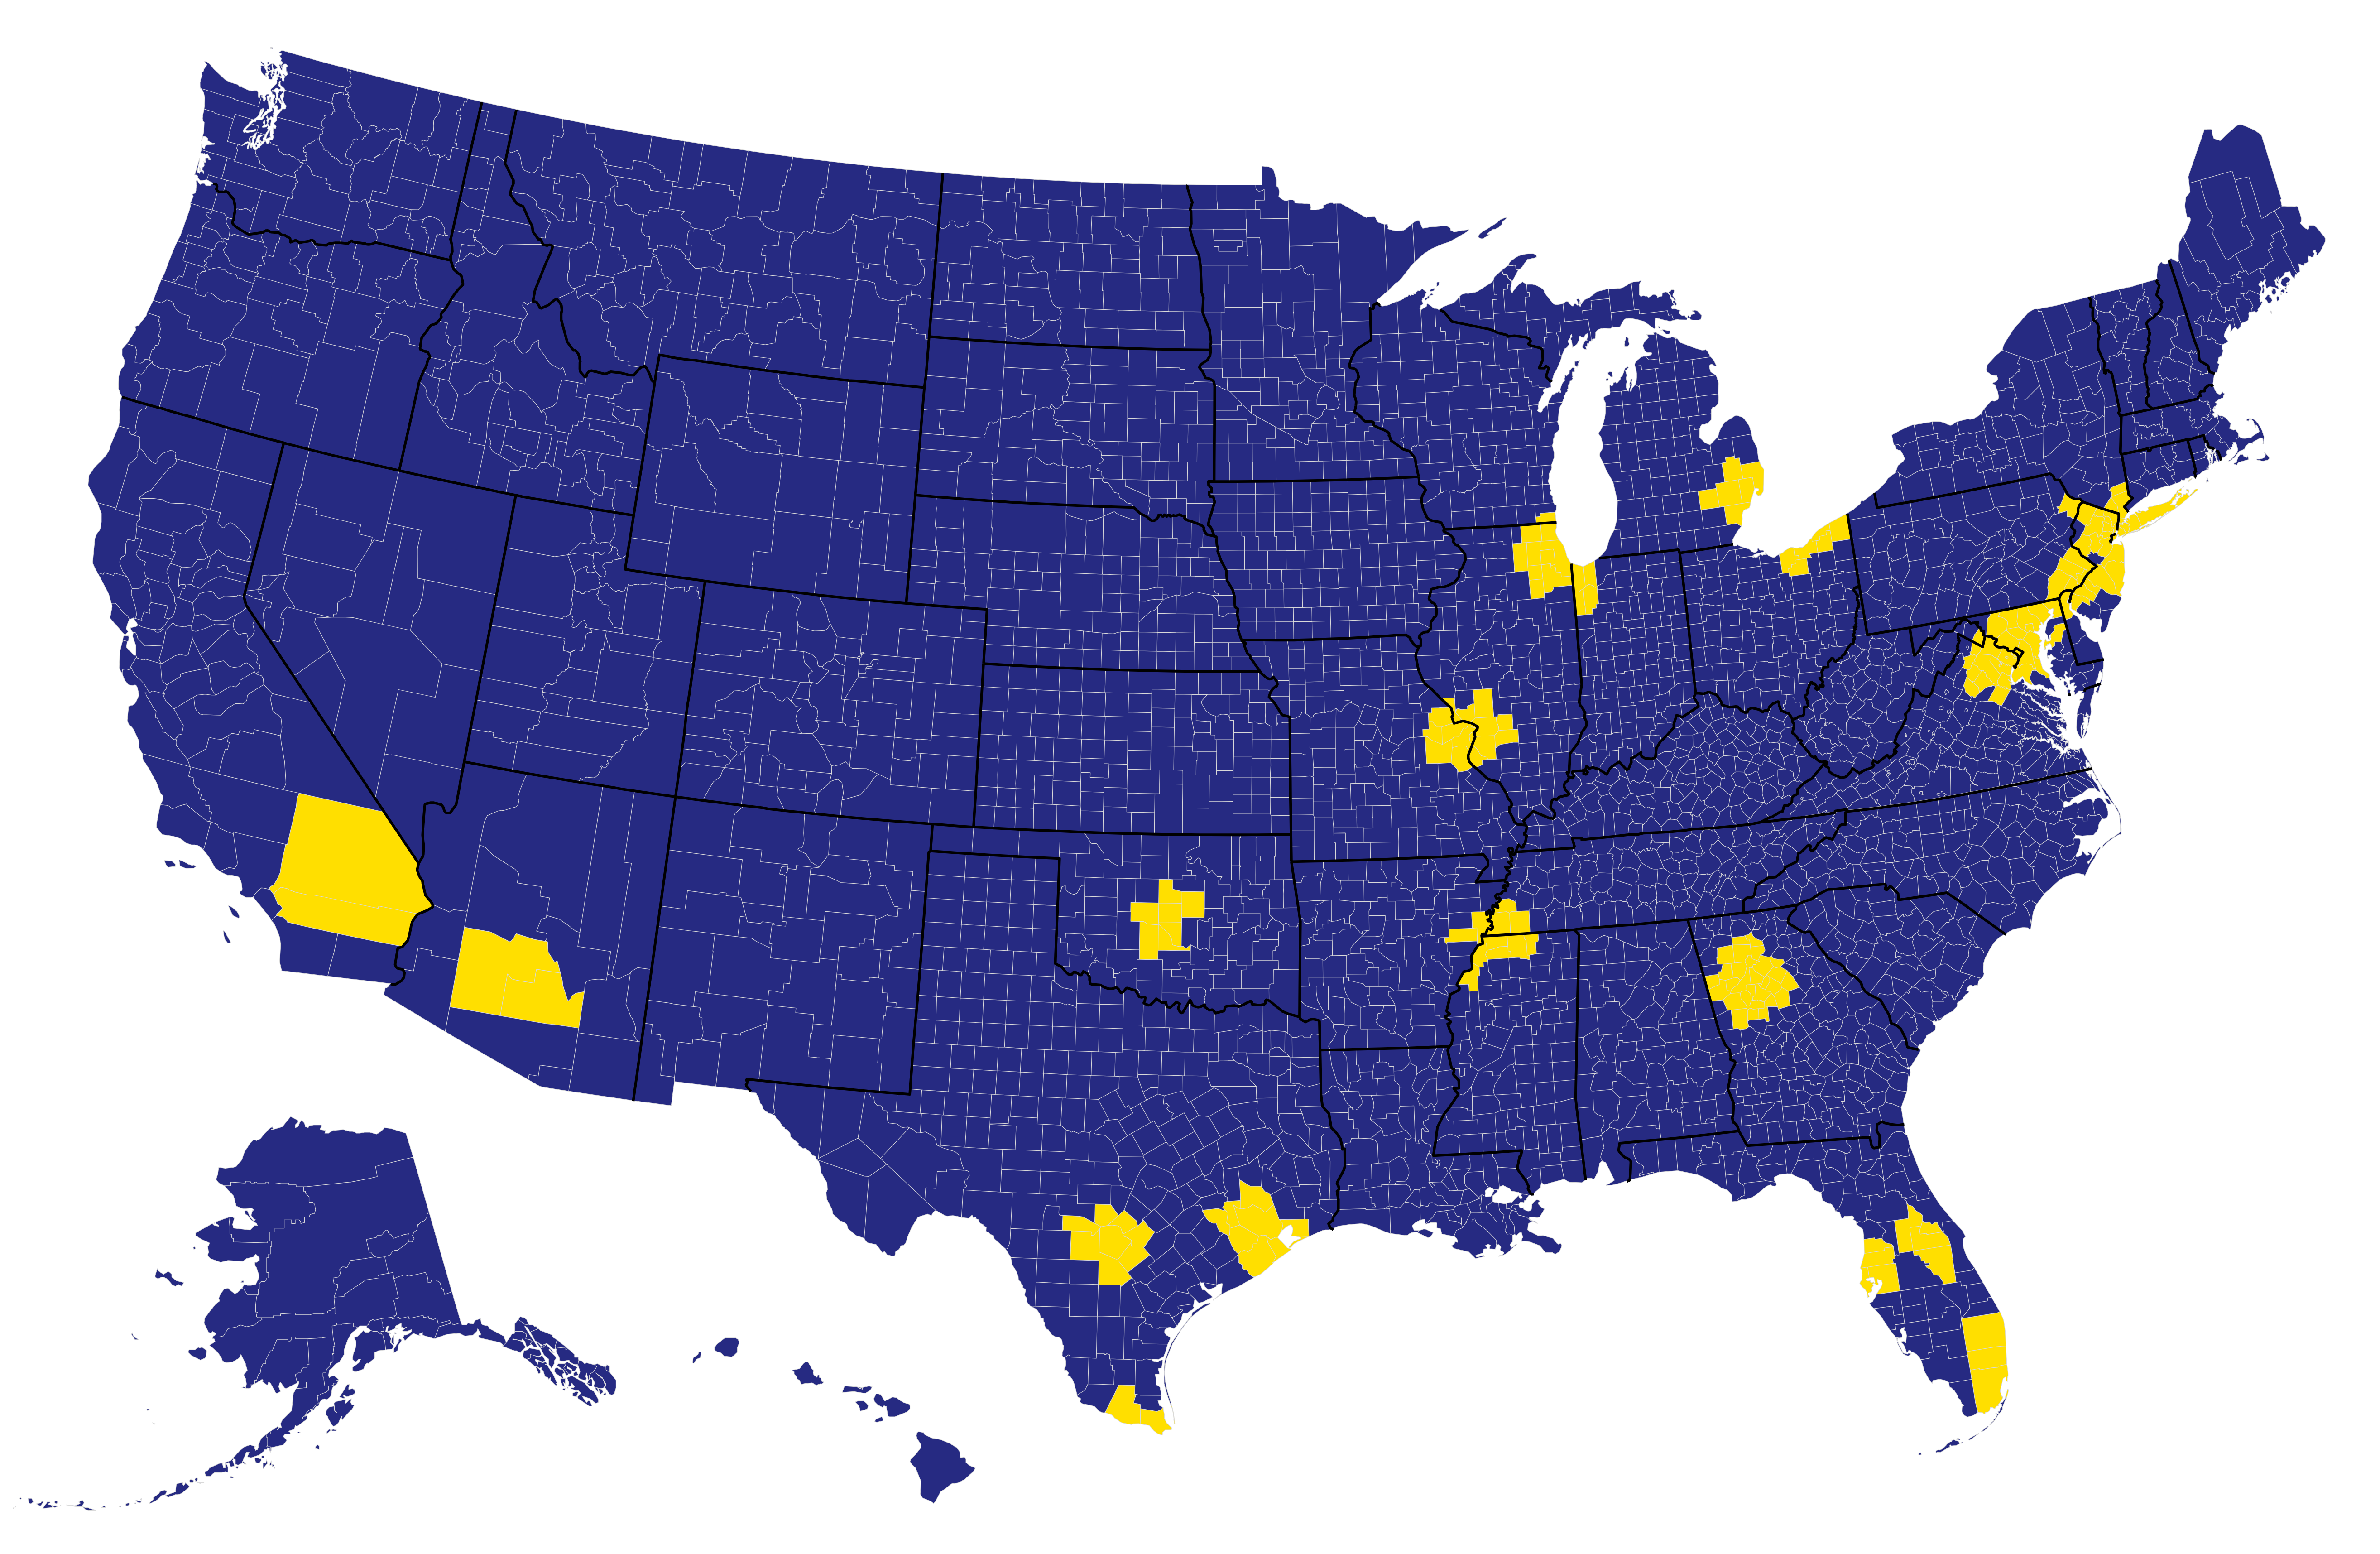 FNMA HomeReady First area availability map displaying the areas listed